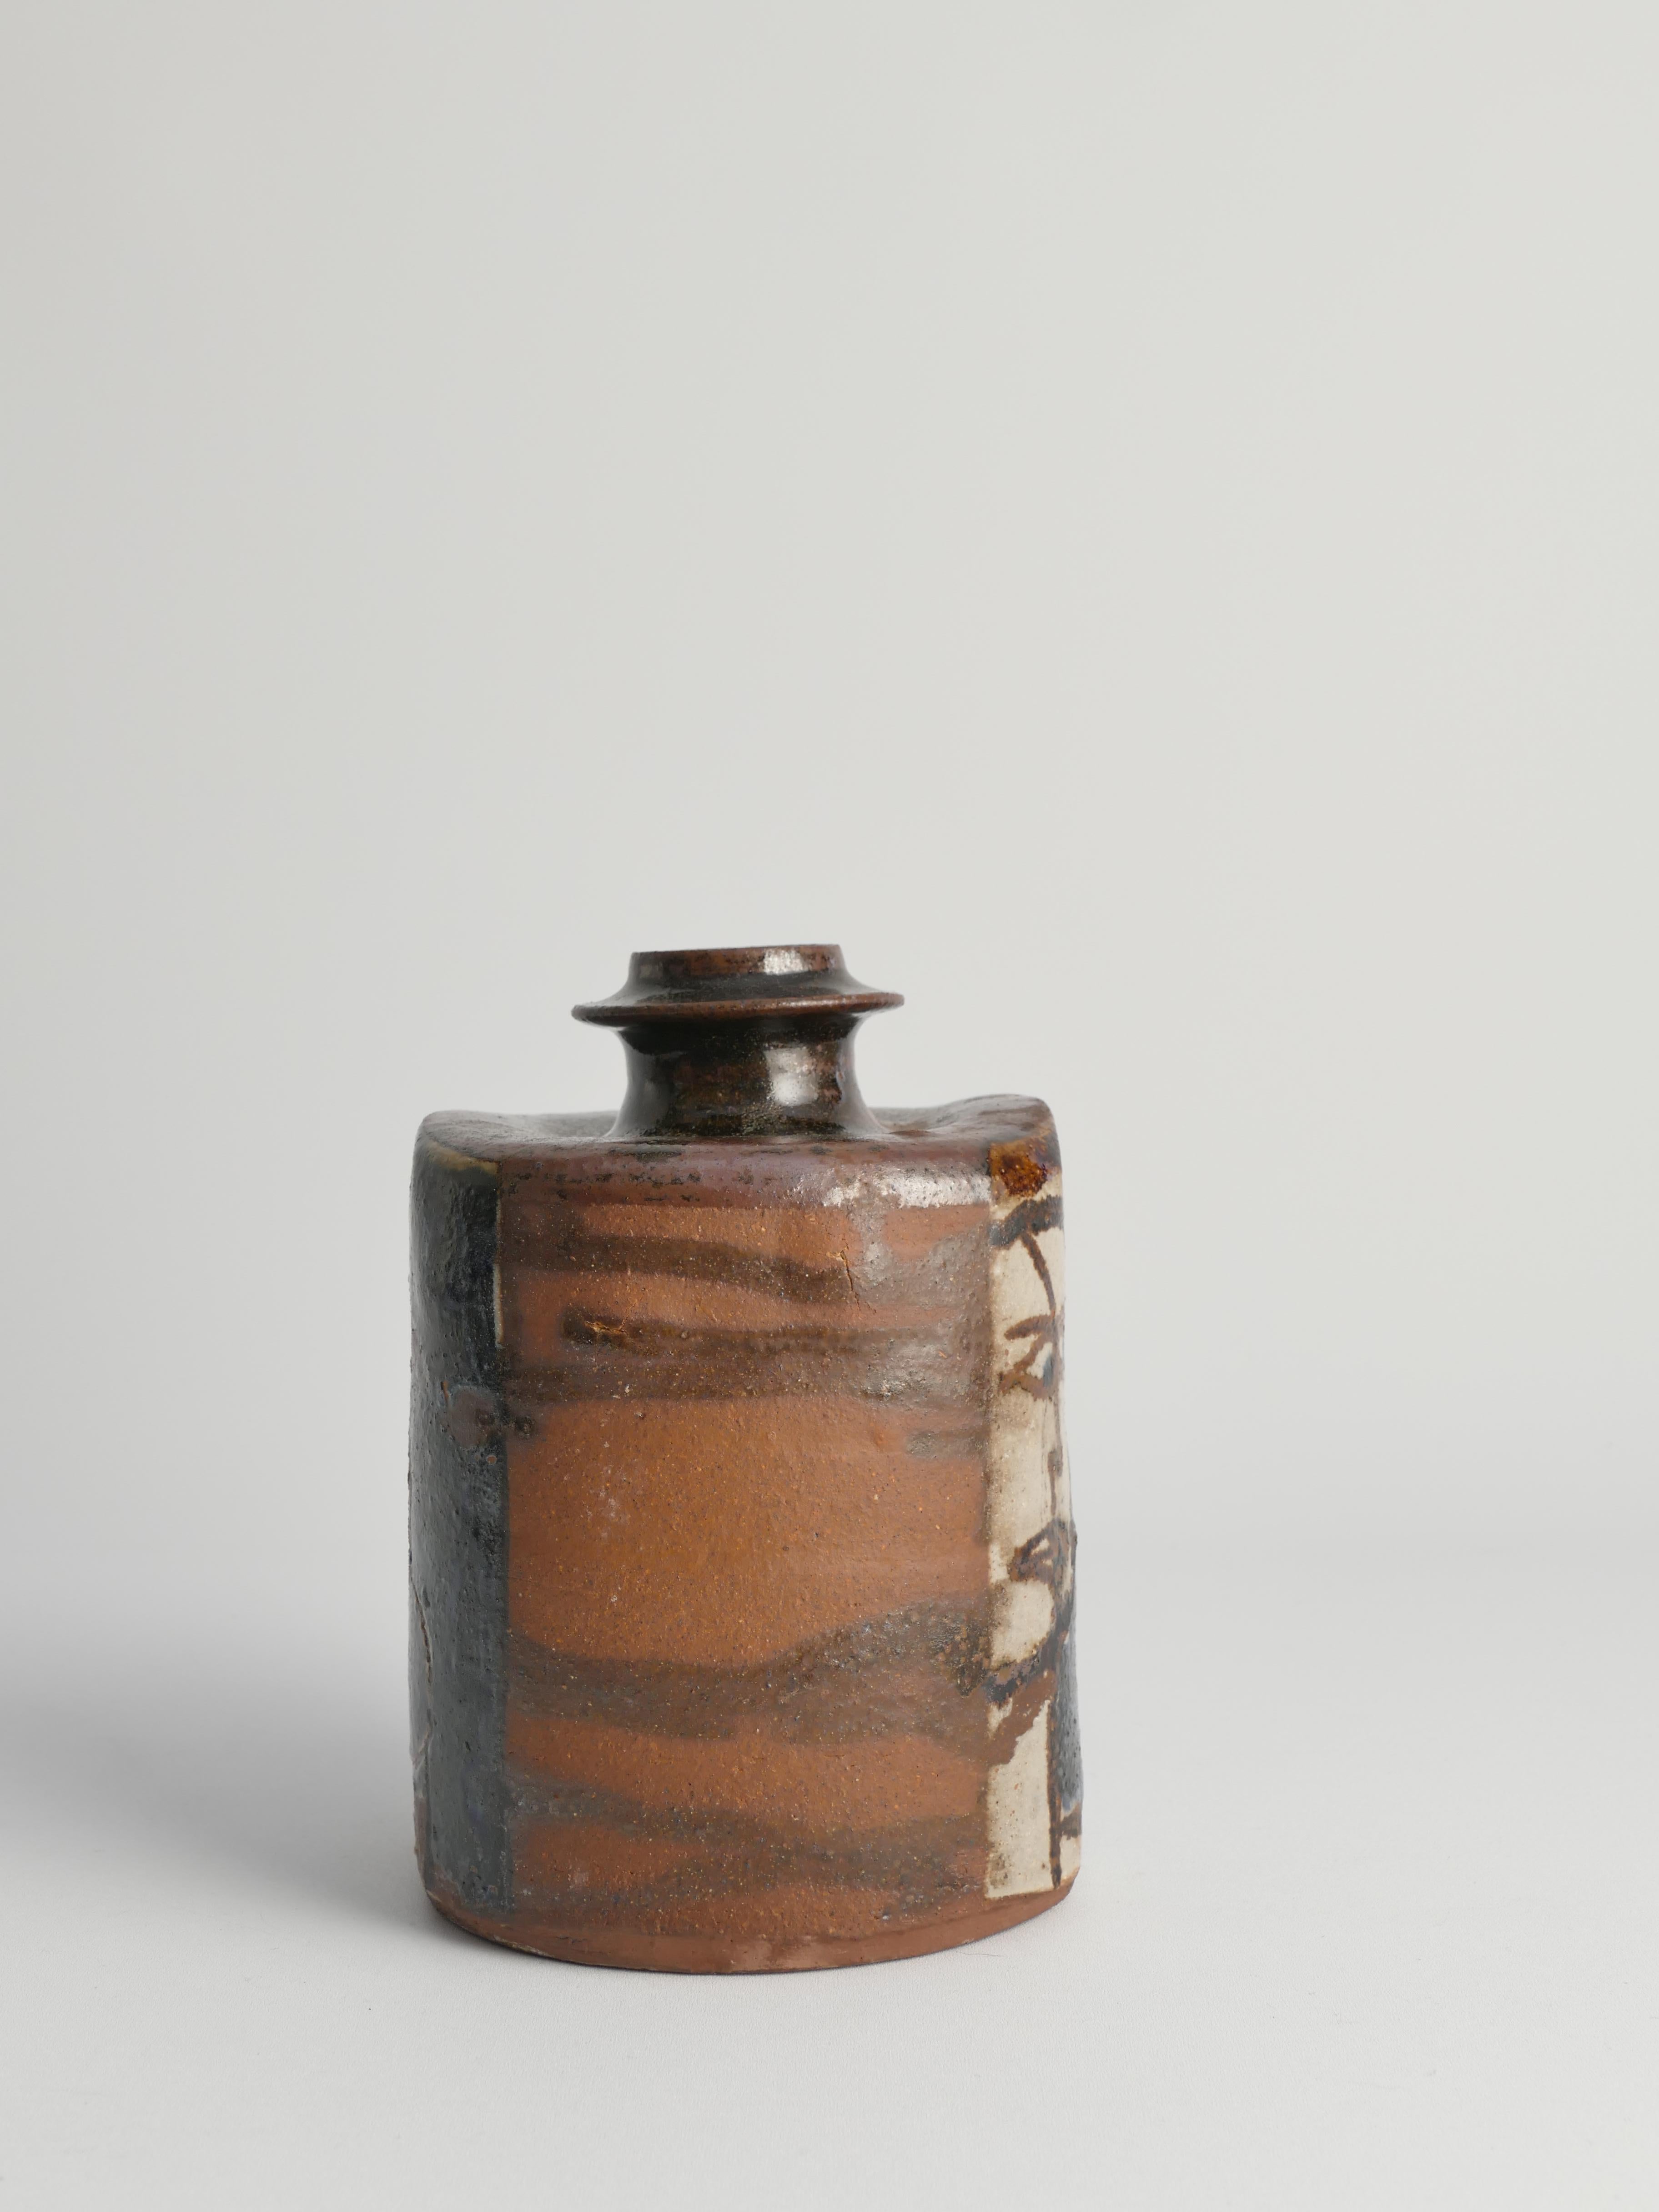 Earthenware Ceramic Square Bottle Vase with Naive-Style Motifs in Brown Glaze  For Sale